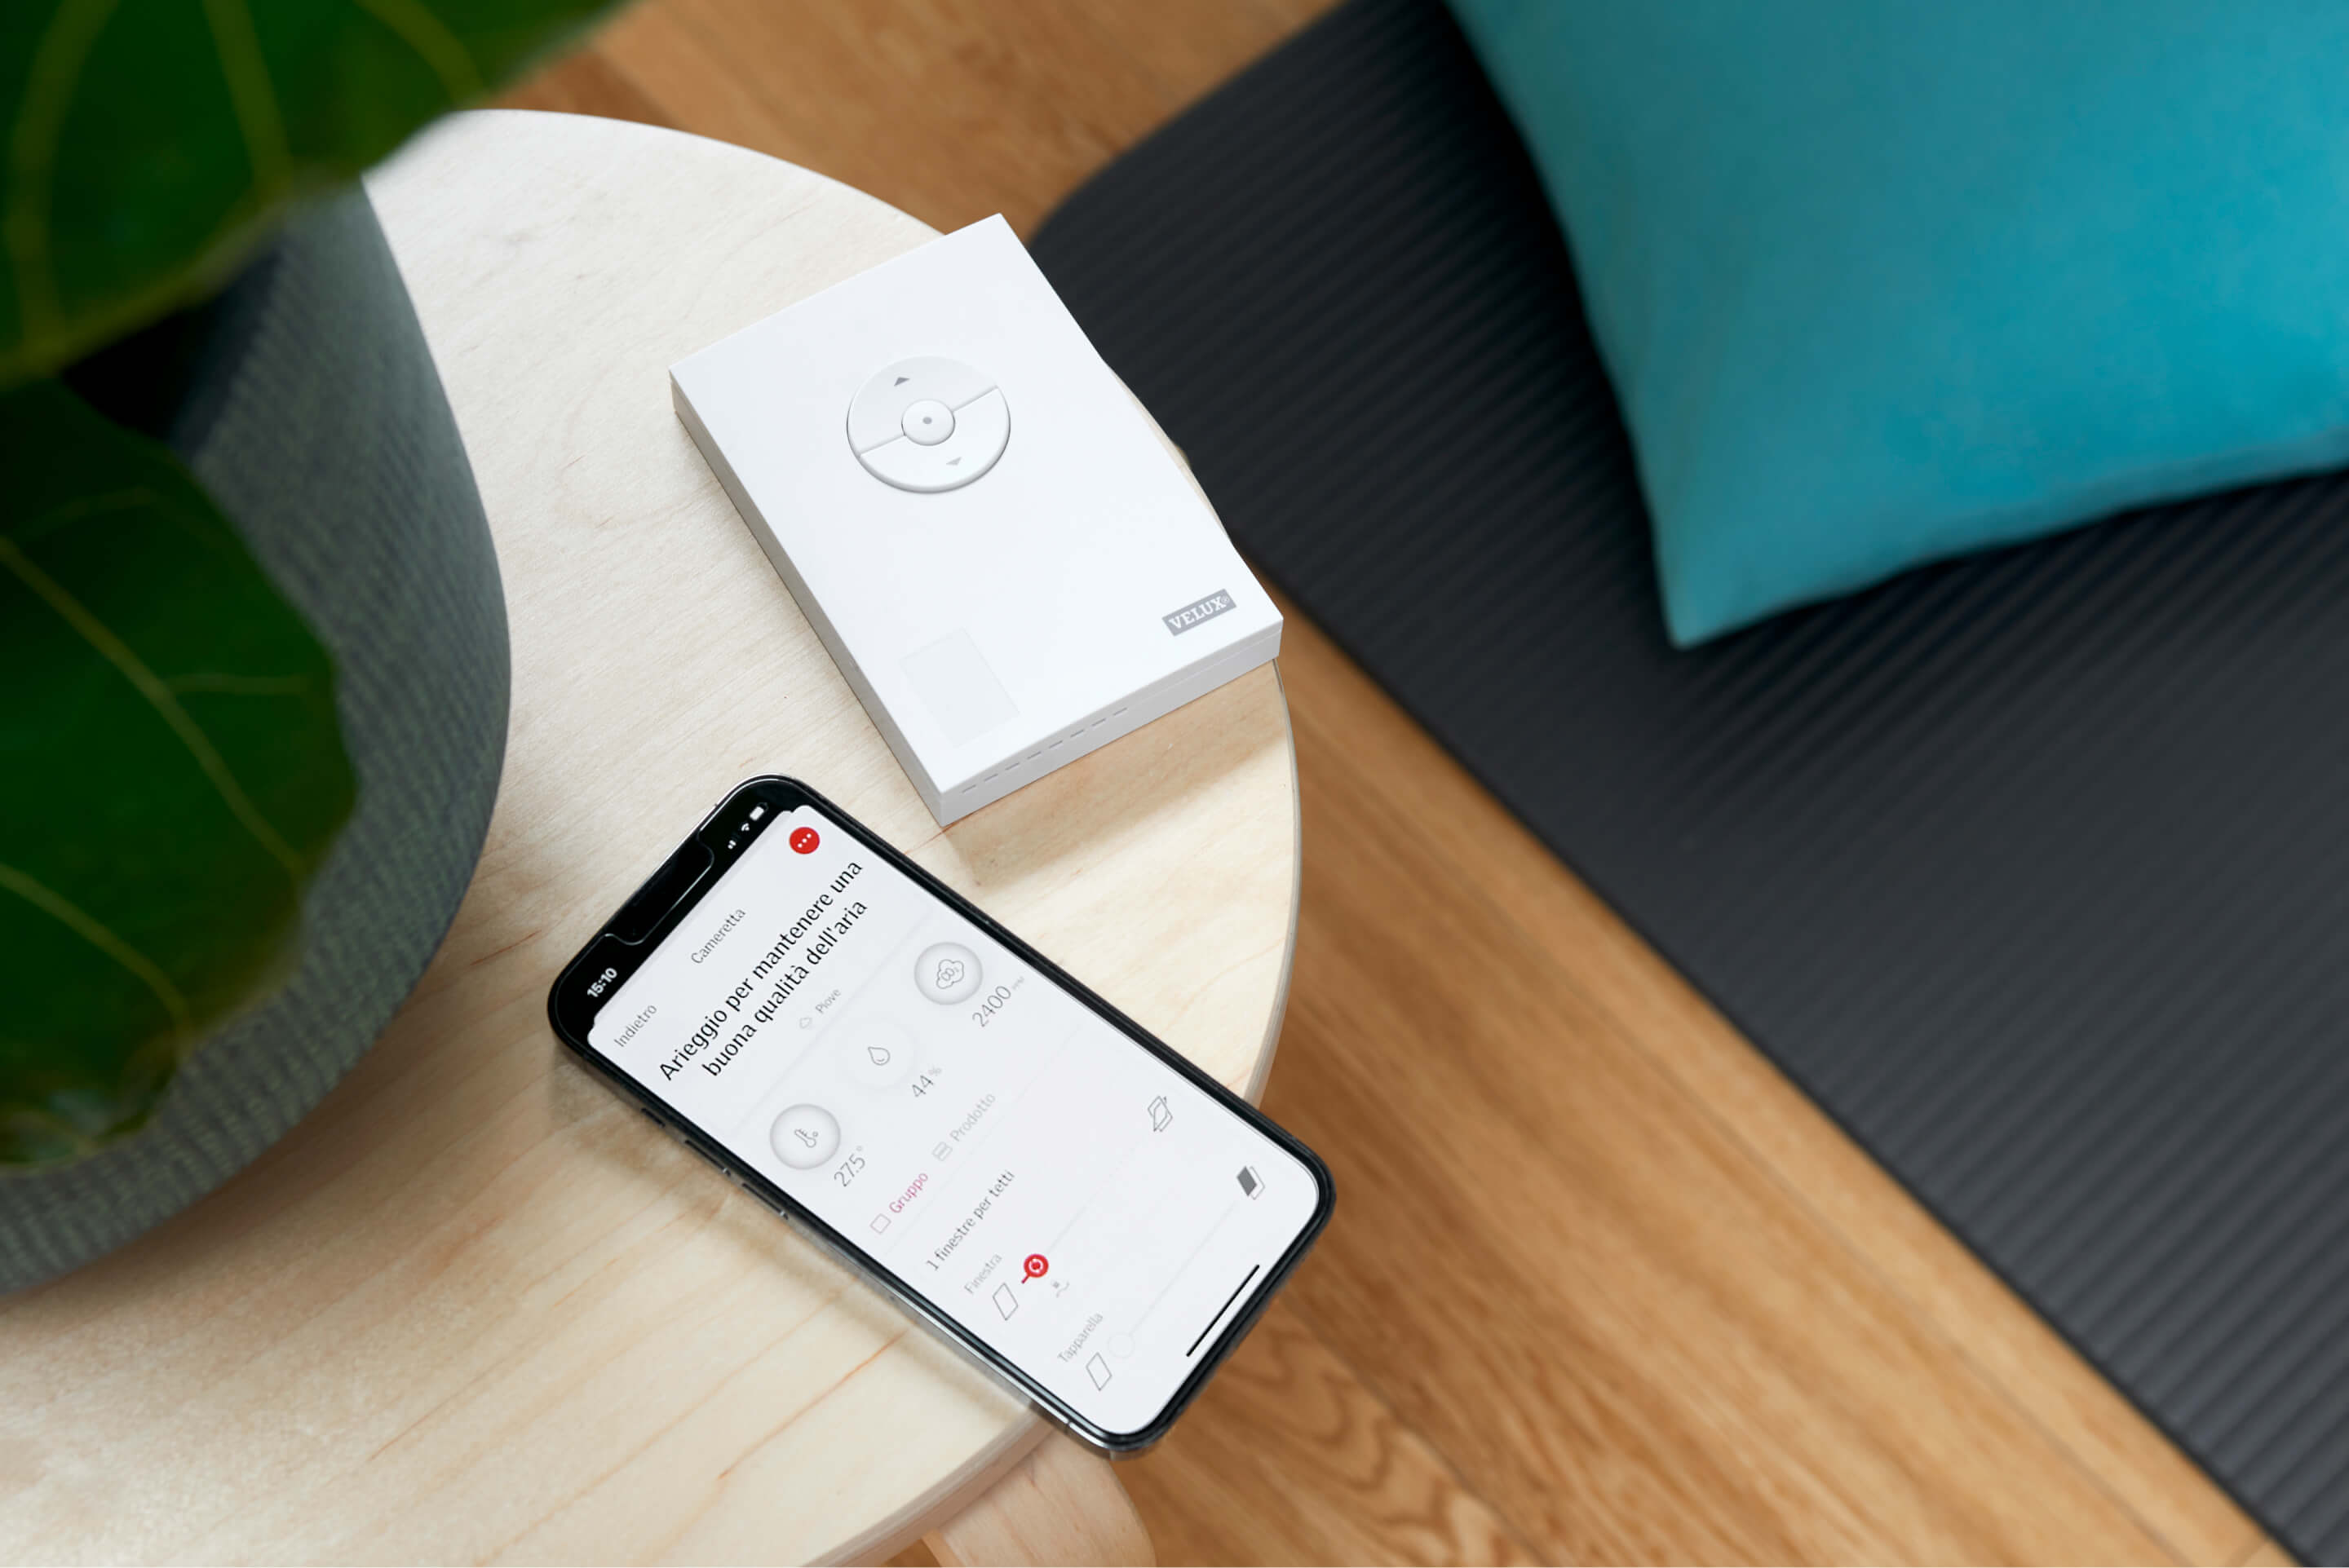 A phone with VELUX app and a remote controller for VELUX ACTIVE on the table